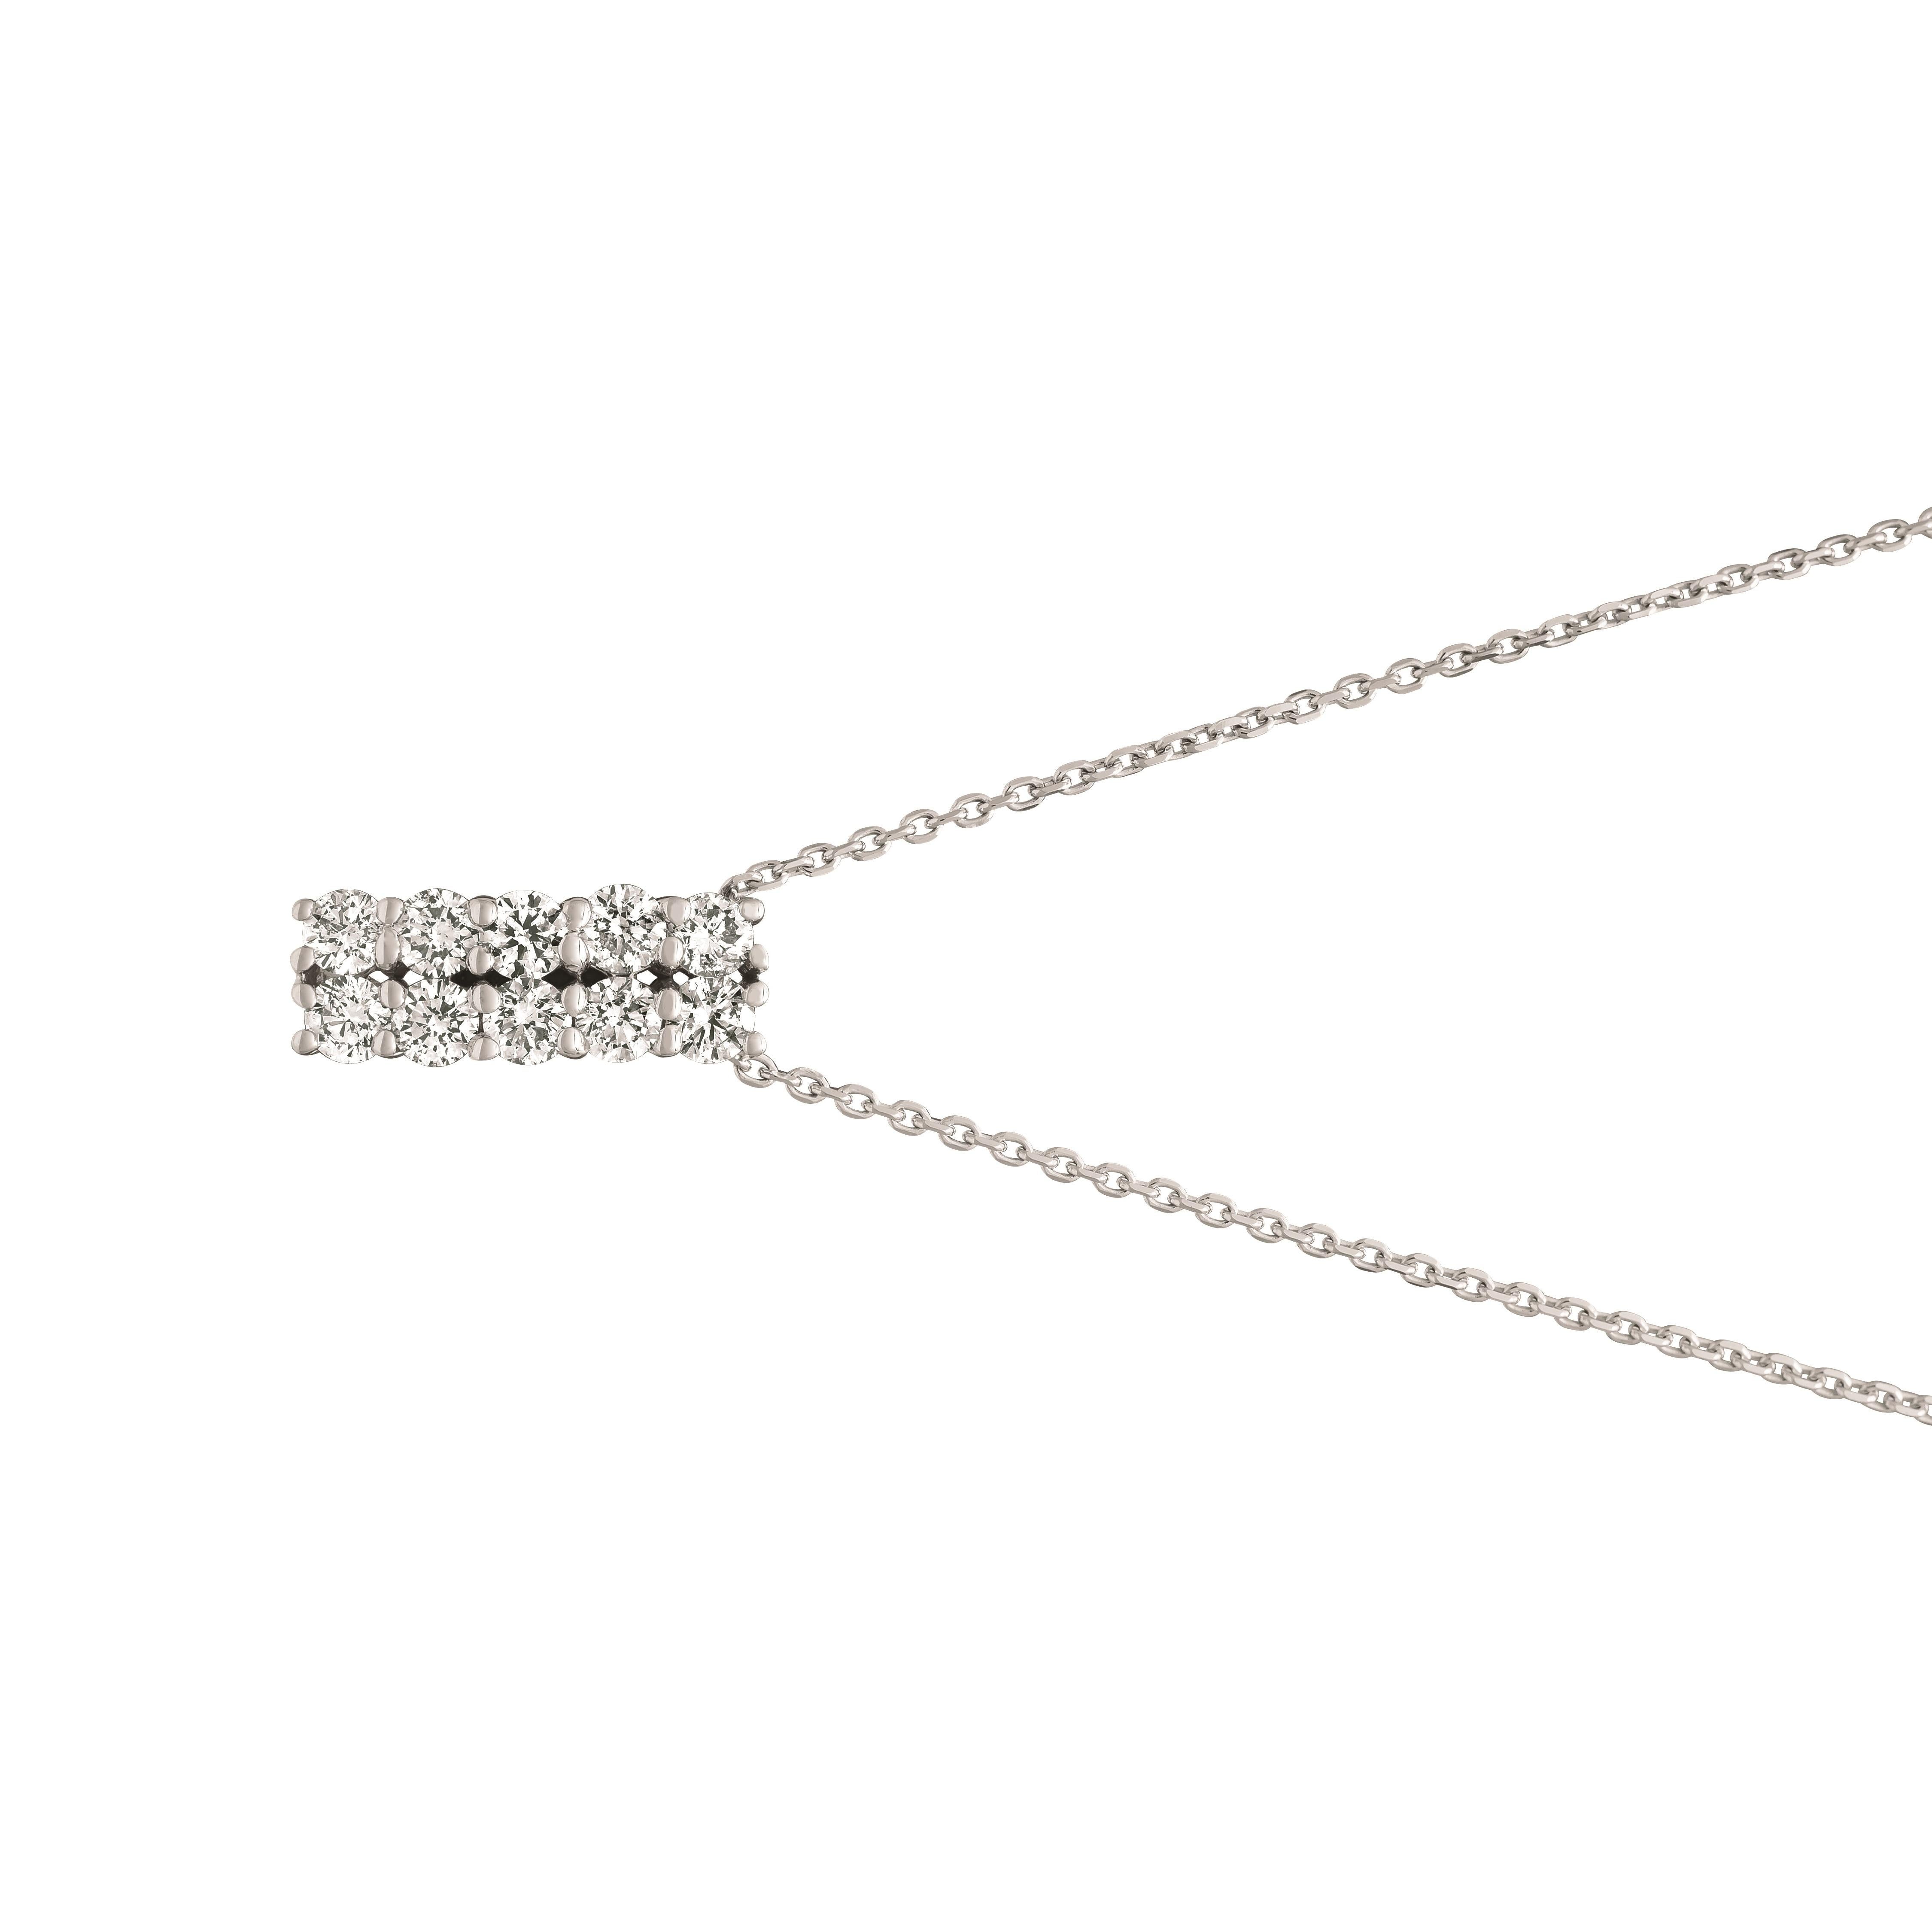 1.01 Carat Natural Diamond 2 Rows Necklace 14K White Gold G SI 18 inches chain

100% Natural Diamonds, Not Enhanced in any way Round Cut Diamond Necklace
1.01CT
G-H
SI
14K White Gold, Prong style , 3.2 grams
5/8 inch in height, 3/16 inch in width
10